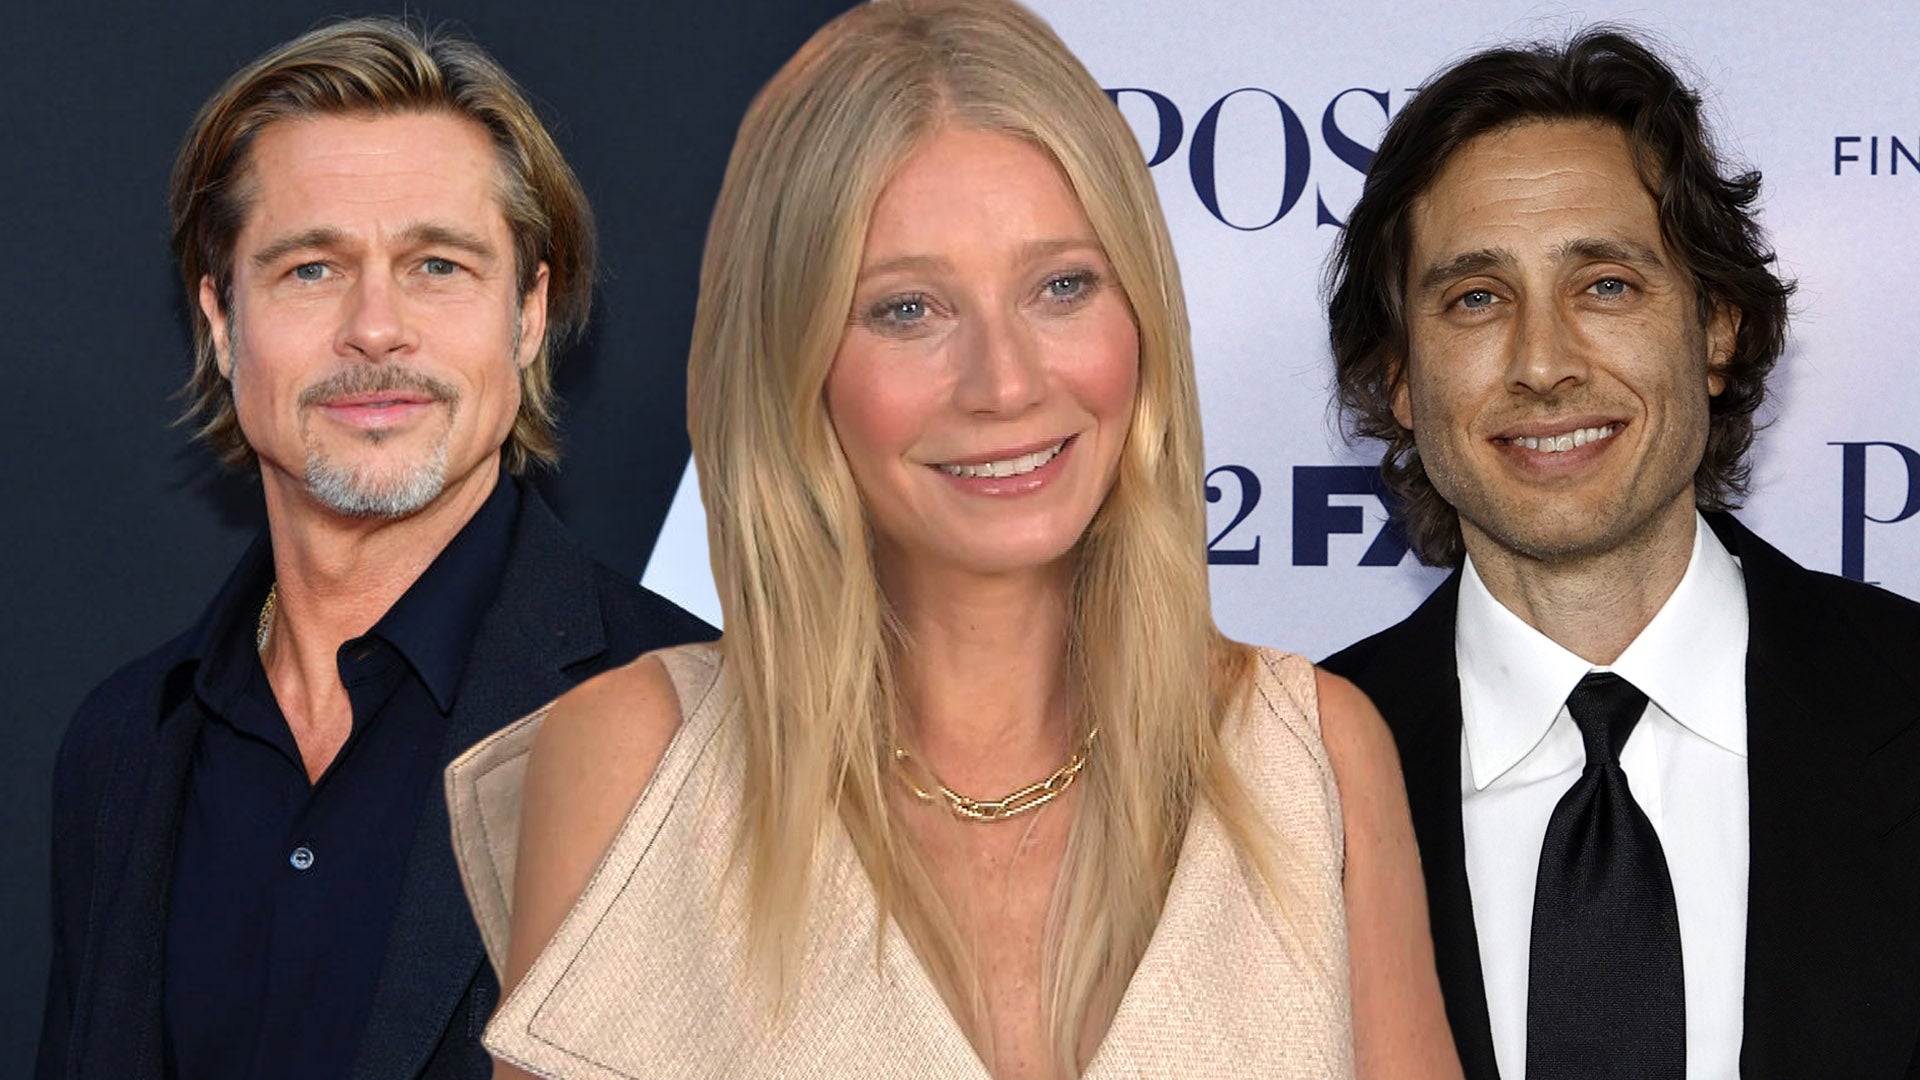 Gwyneth Paltrow on Reviving Friendship With Brad Pitt and How Husband Brad Falchuk Feels About It